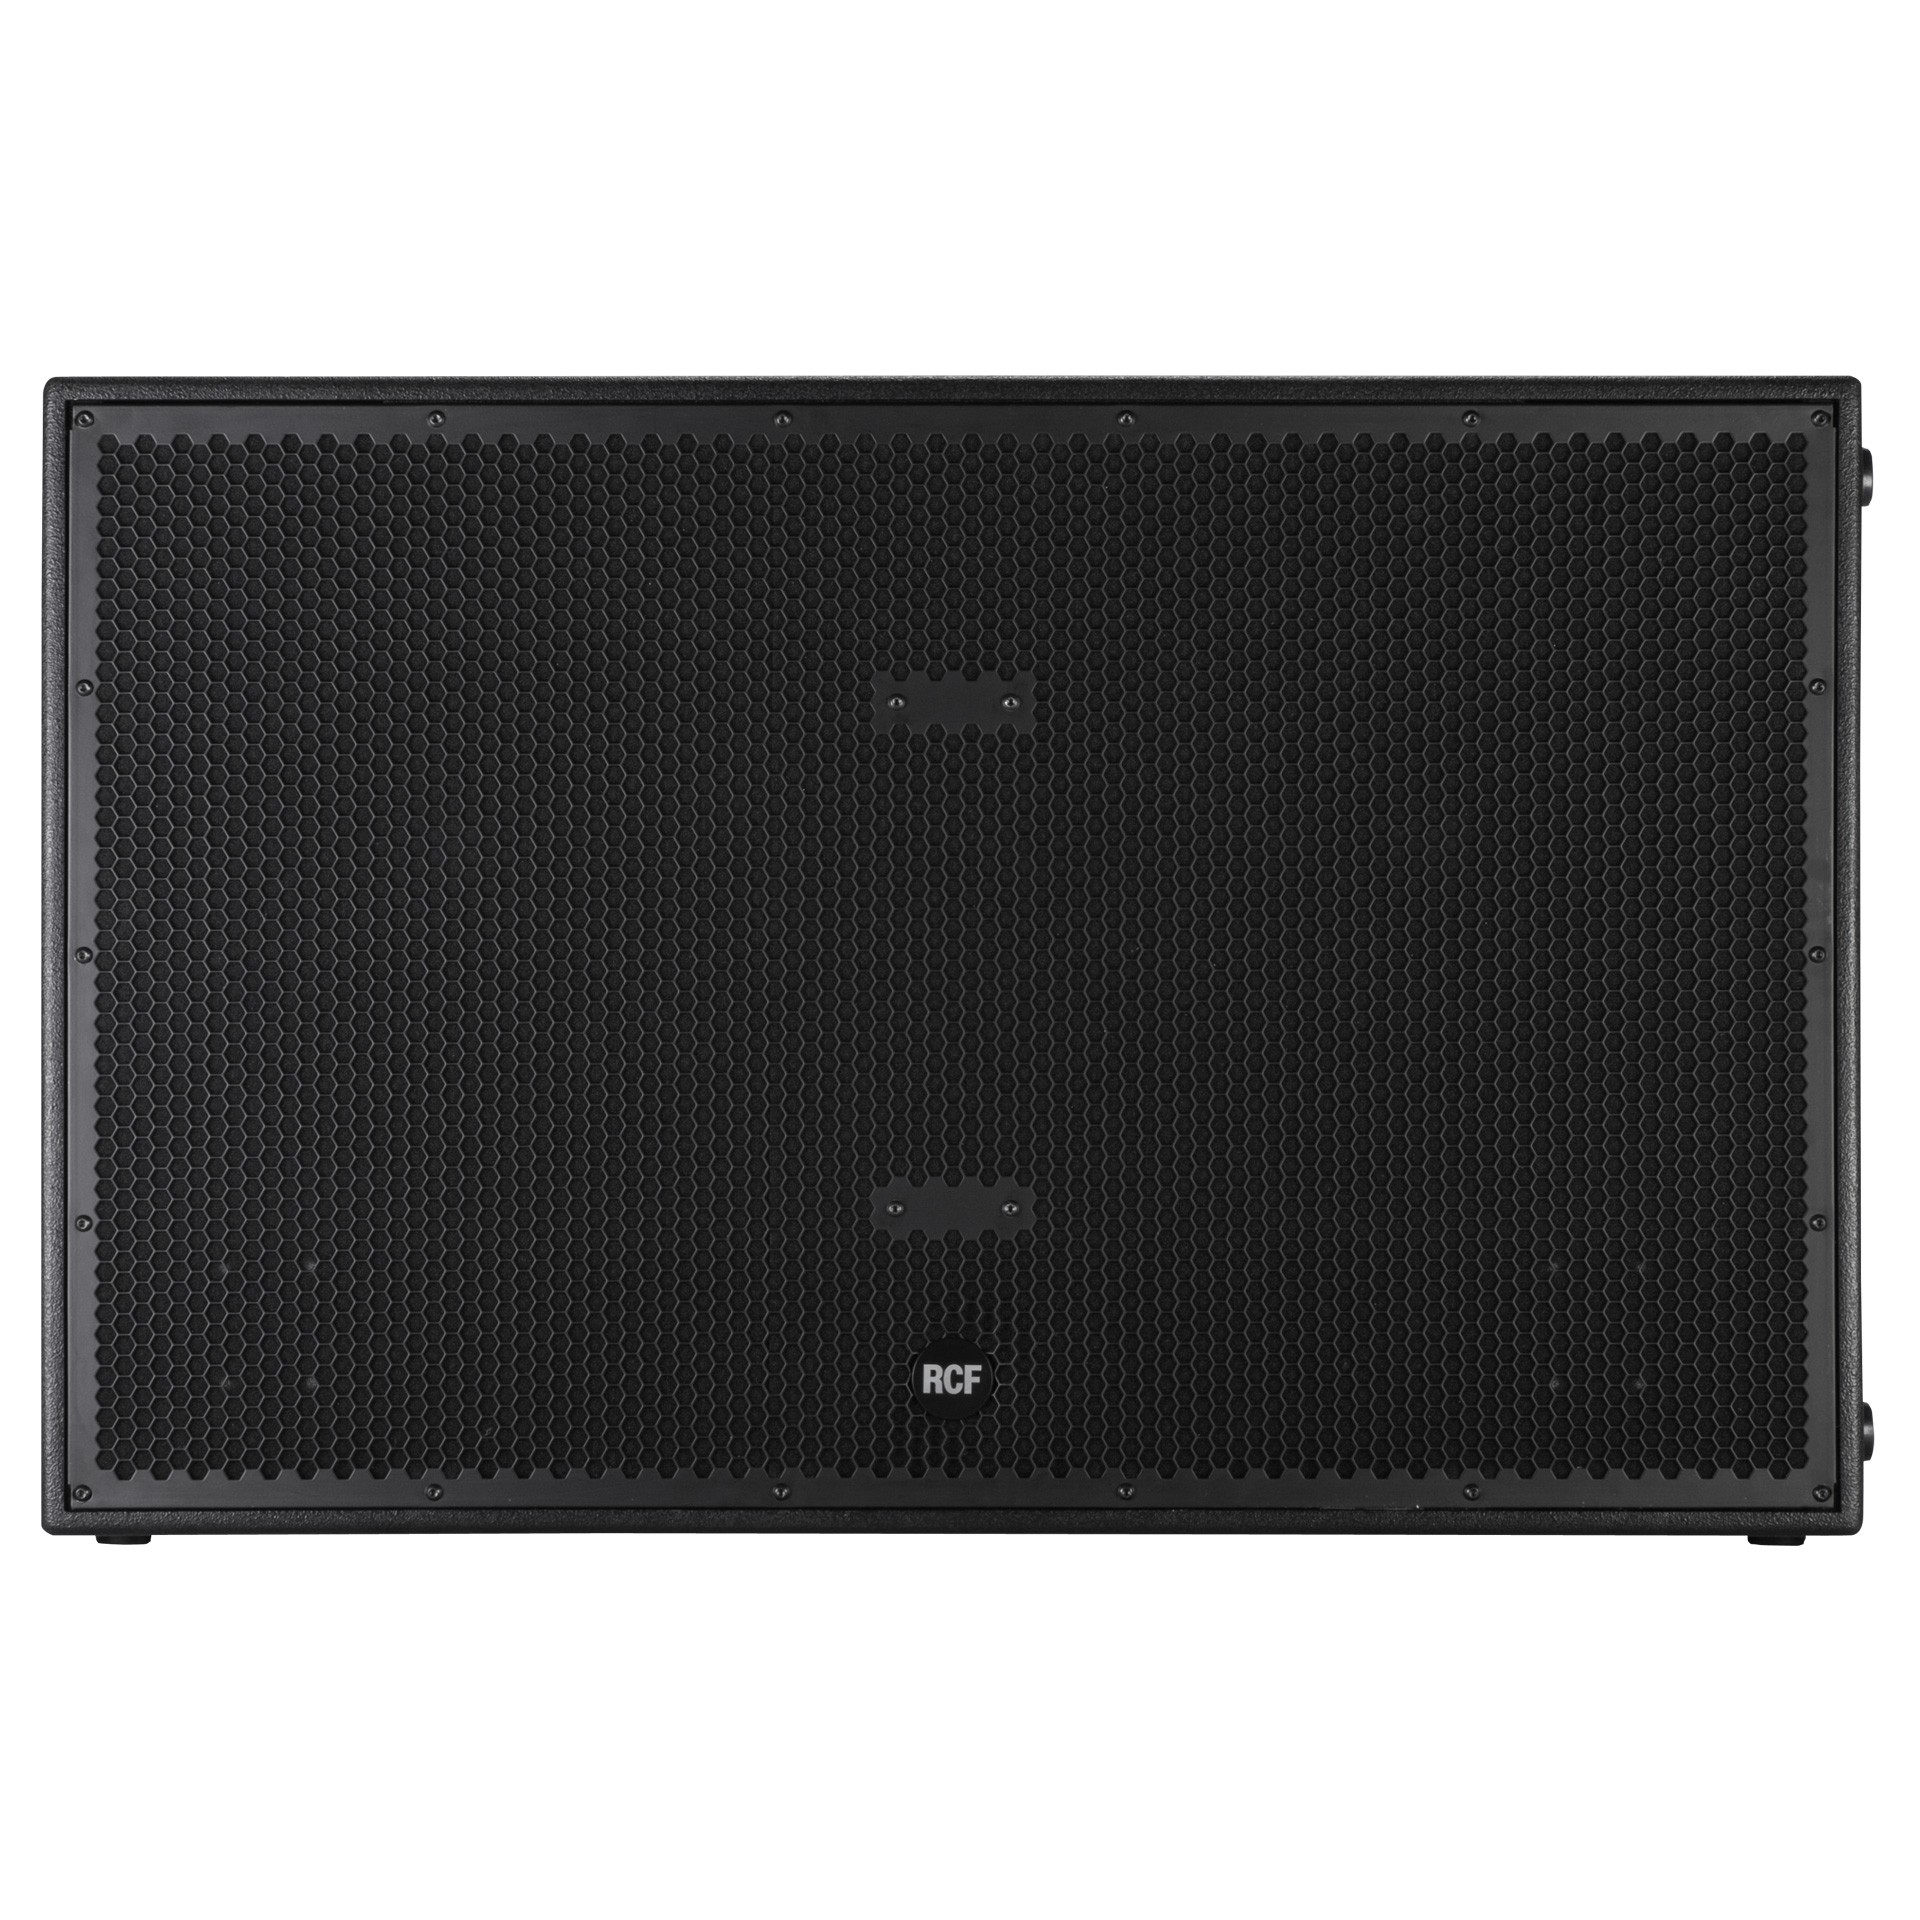 Subwoofere pro - Subwoofer activ RCF SUB 8006-AS, audioclub.ro